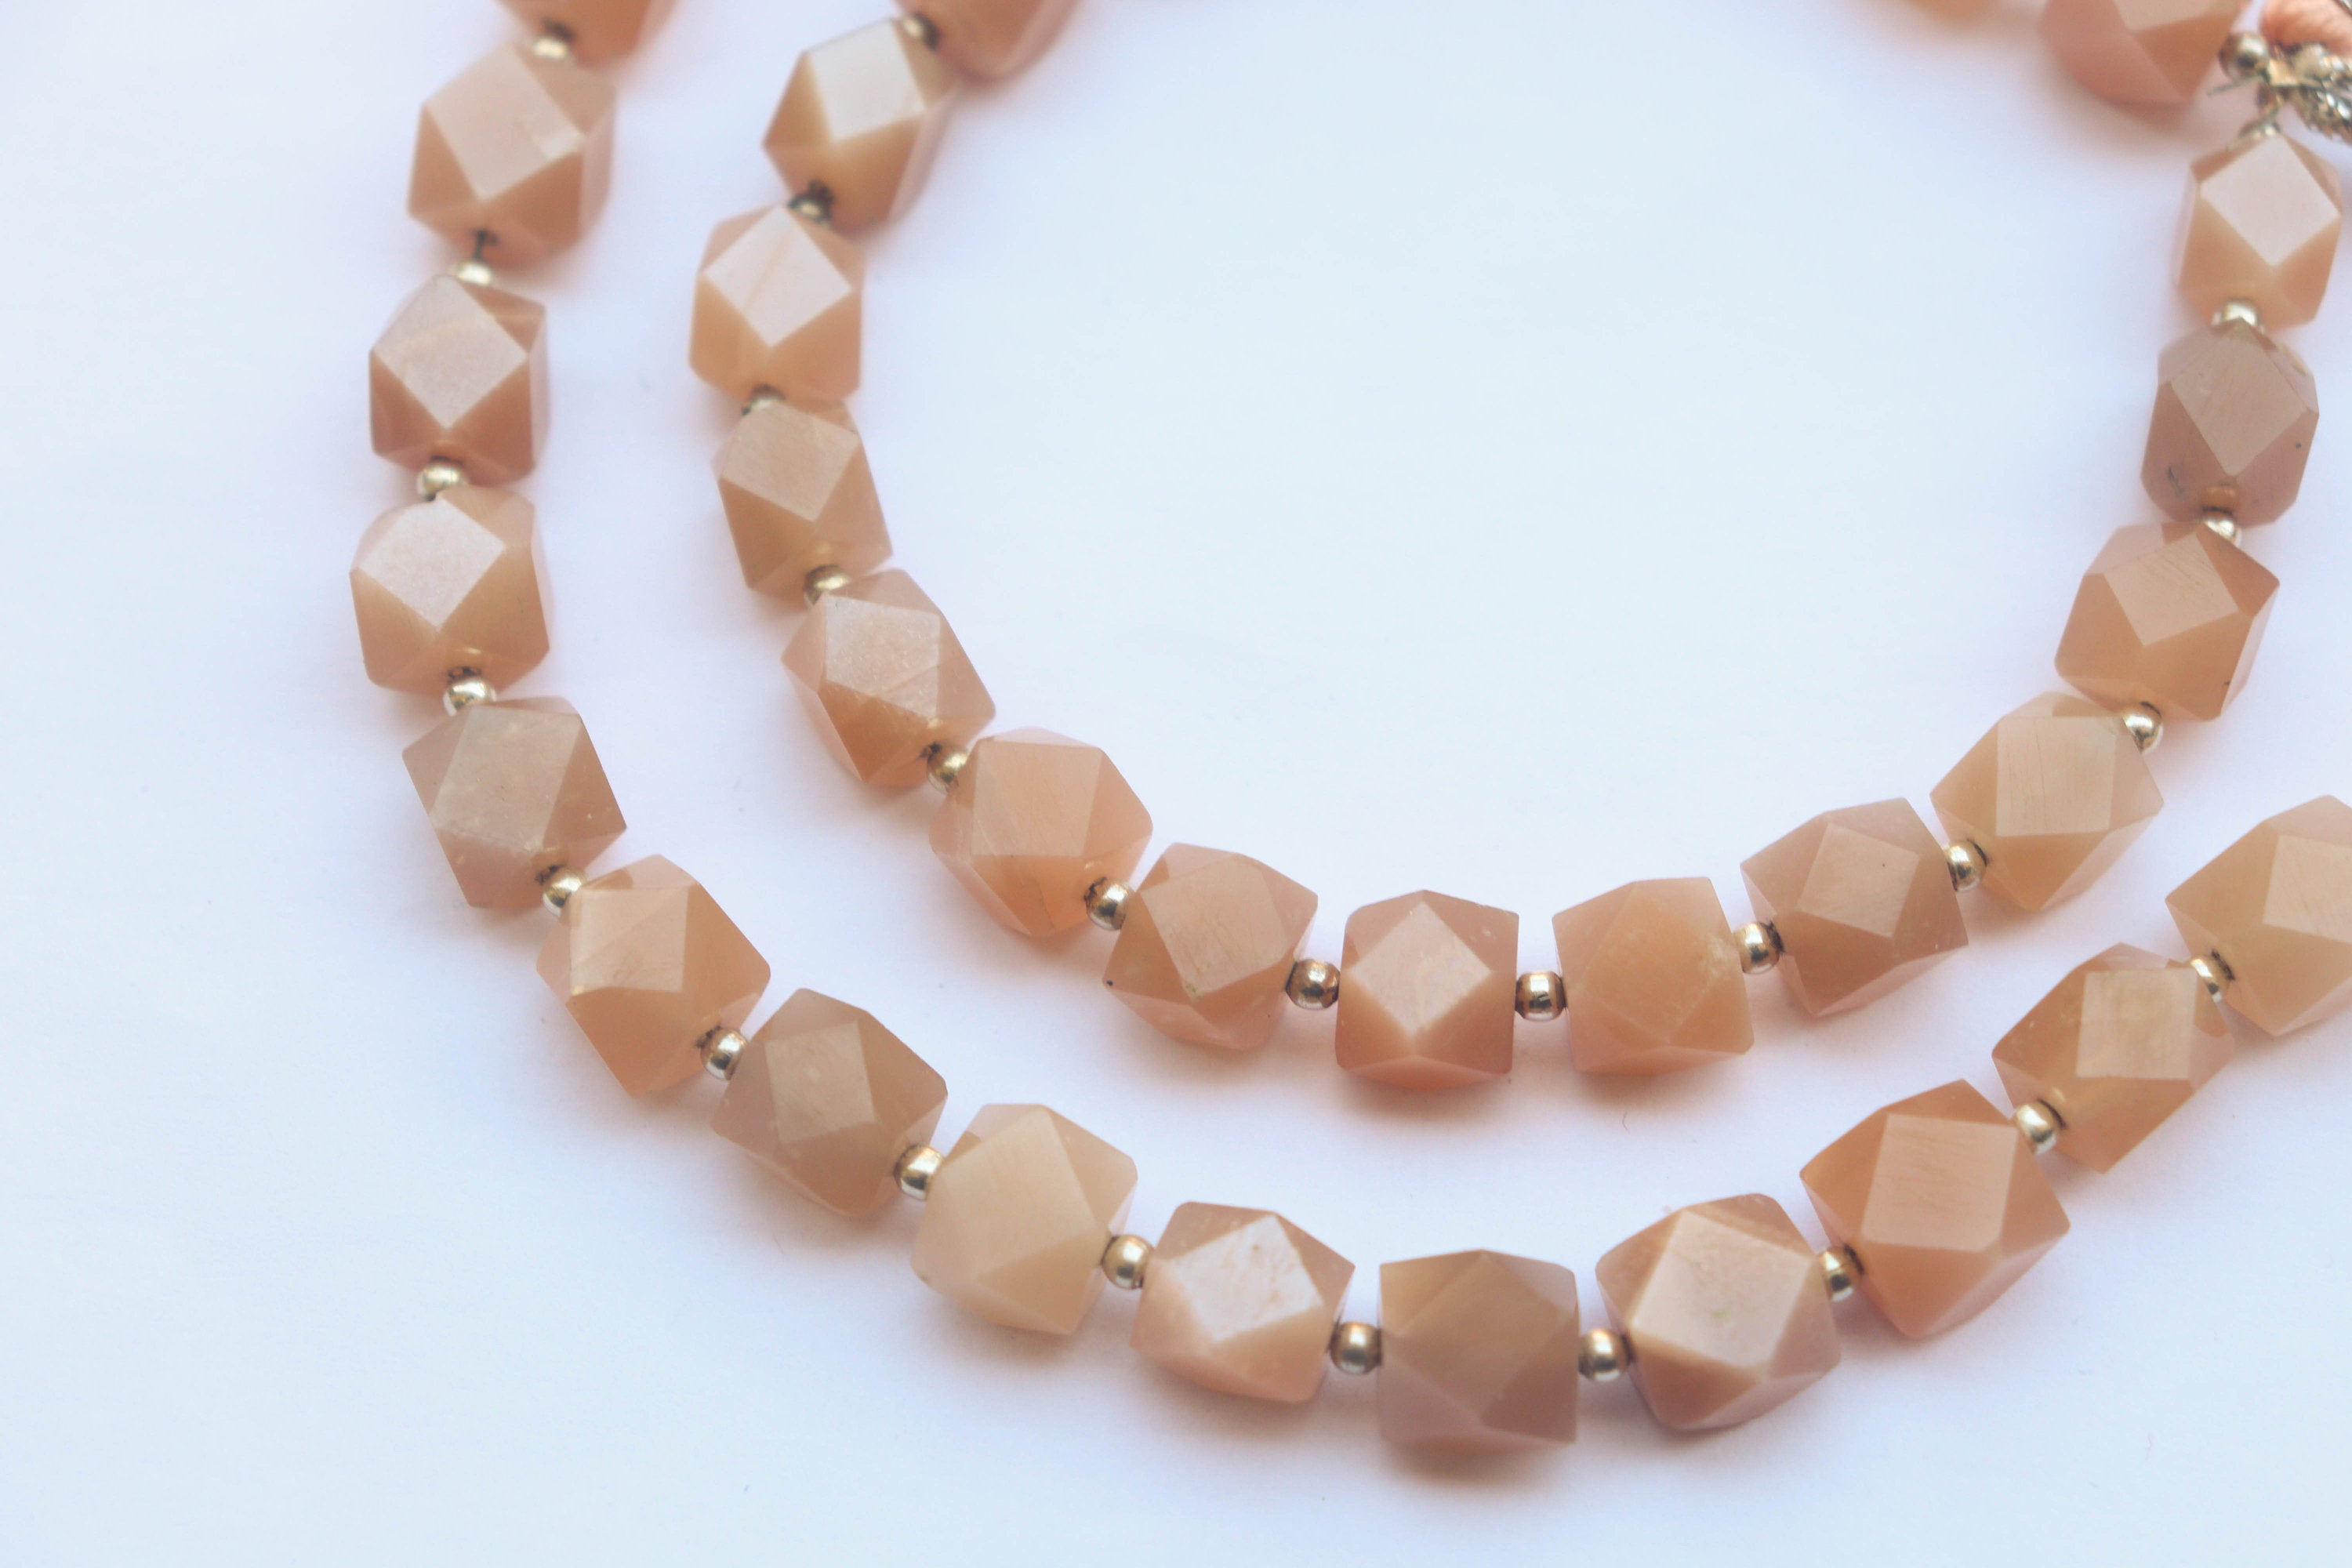 20 Pc PEACH MOONSTONE Beads Uneven Shape Faceted | 7mm | Center Drill | Natural Gemstone Beads for jewelry making | Beadsforyourjewellery Beadsforyourjewelry